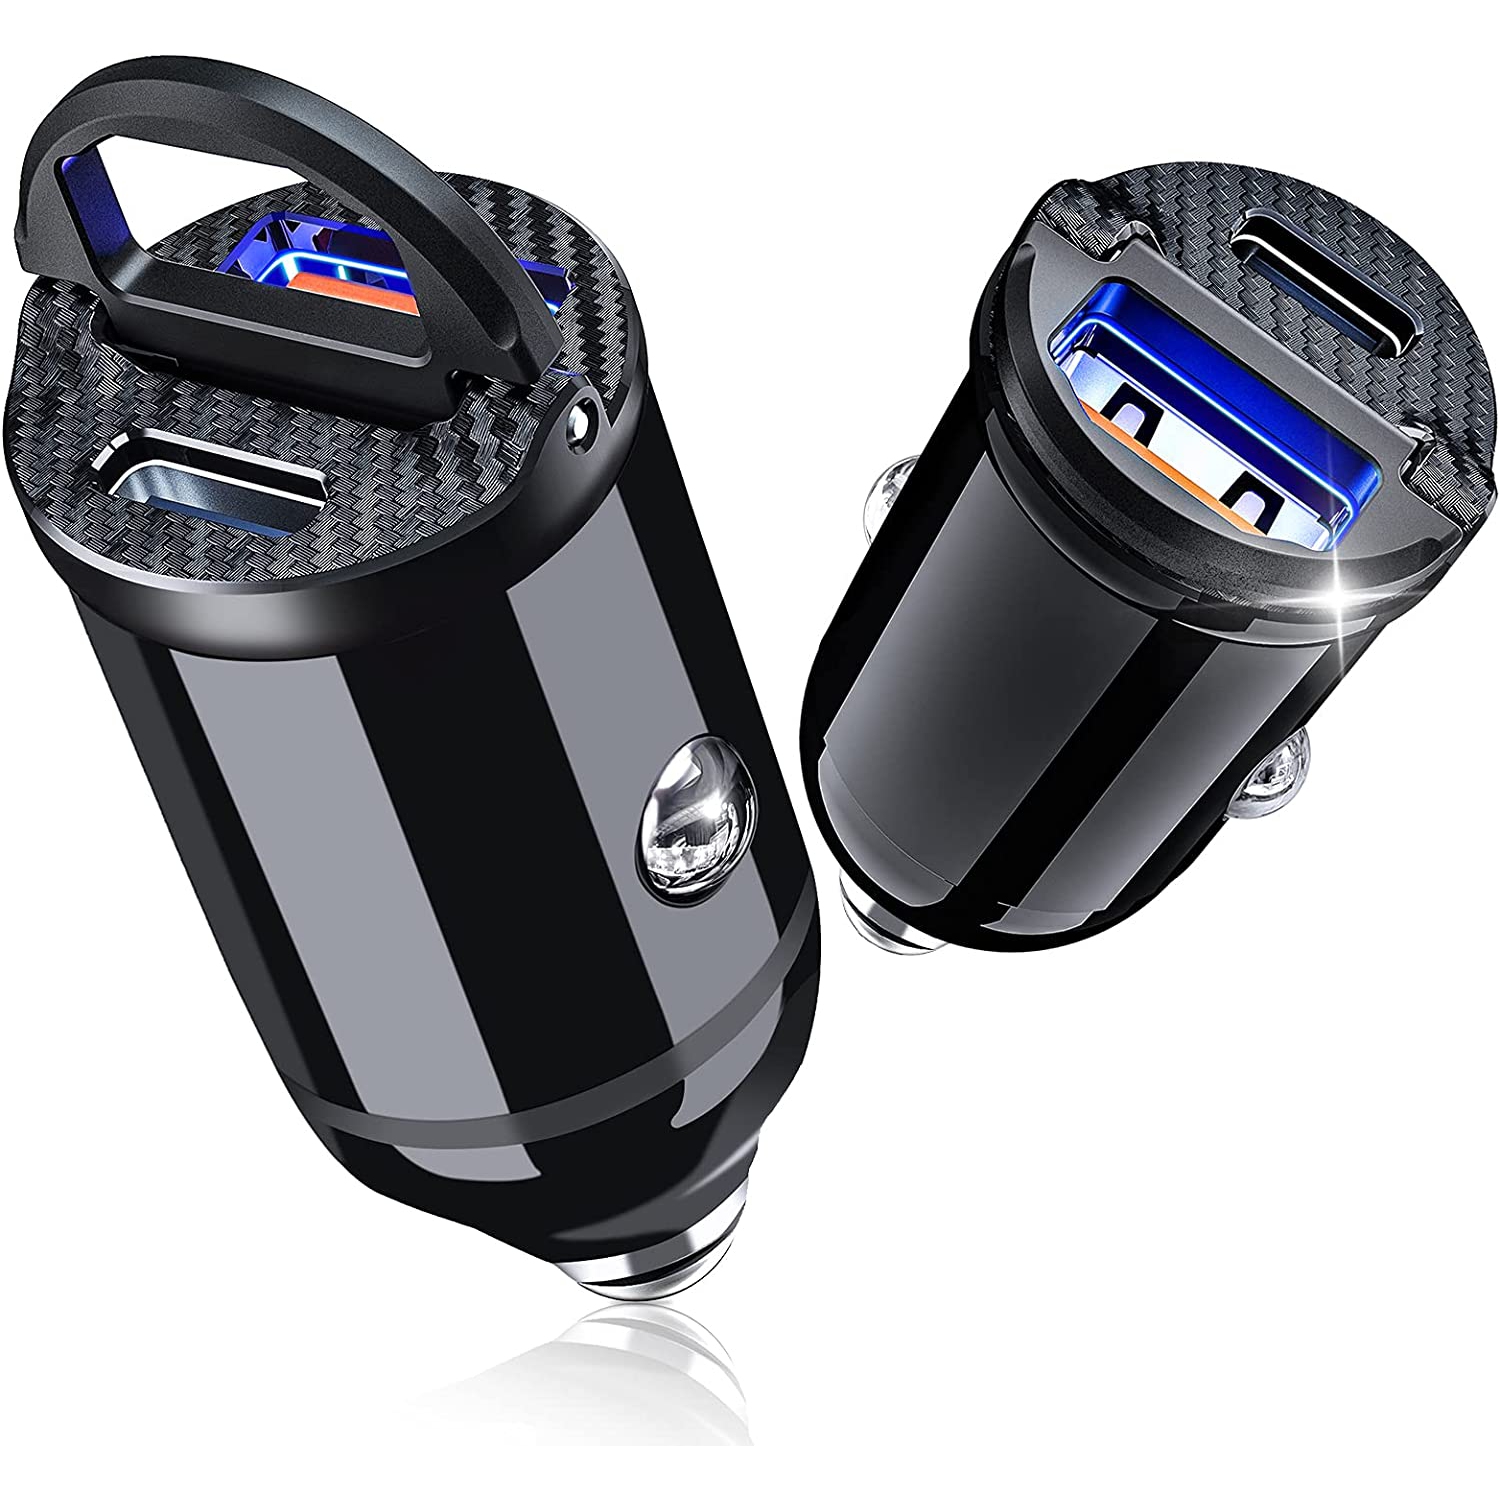 USB C Car Charger(2 Pack), Super Mini 30W PD & 30W QC3.0 Fast Car Charger Adapter 4.8A Dual Port Cigarette Lighter USB Charger Socket Flush Fit Compatible with iPhone 12 iP